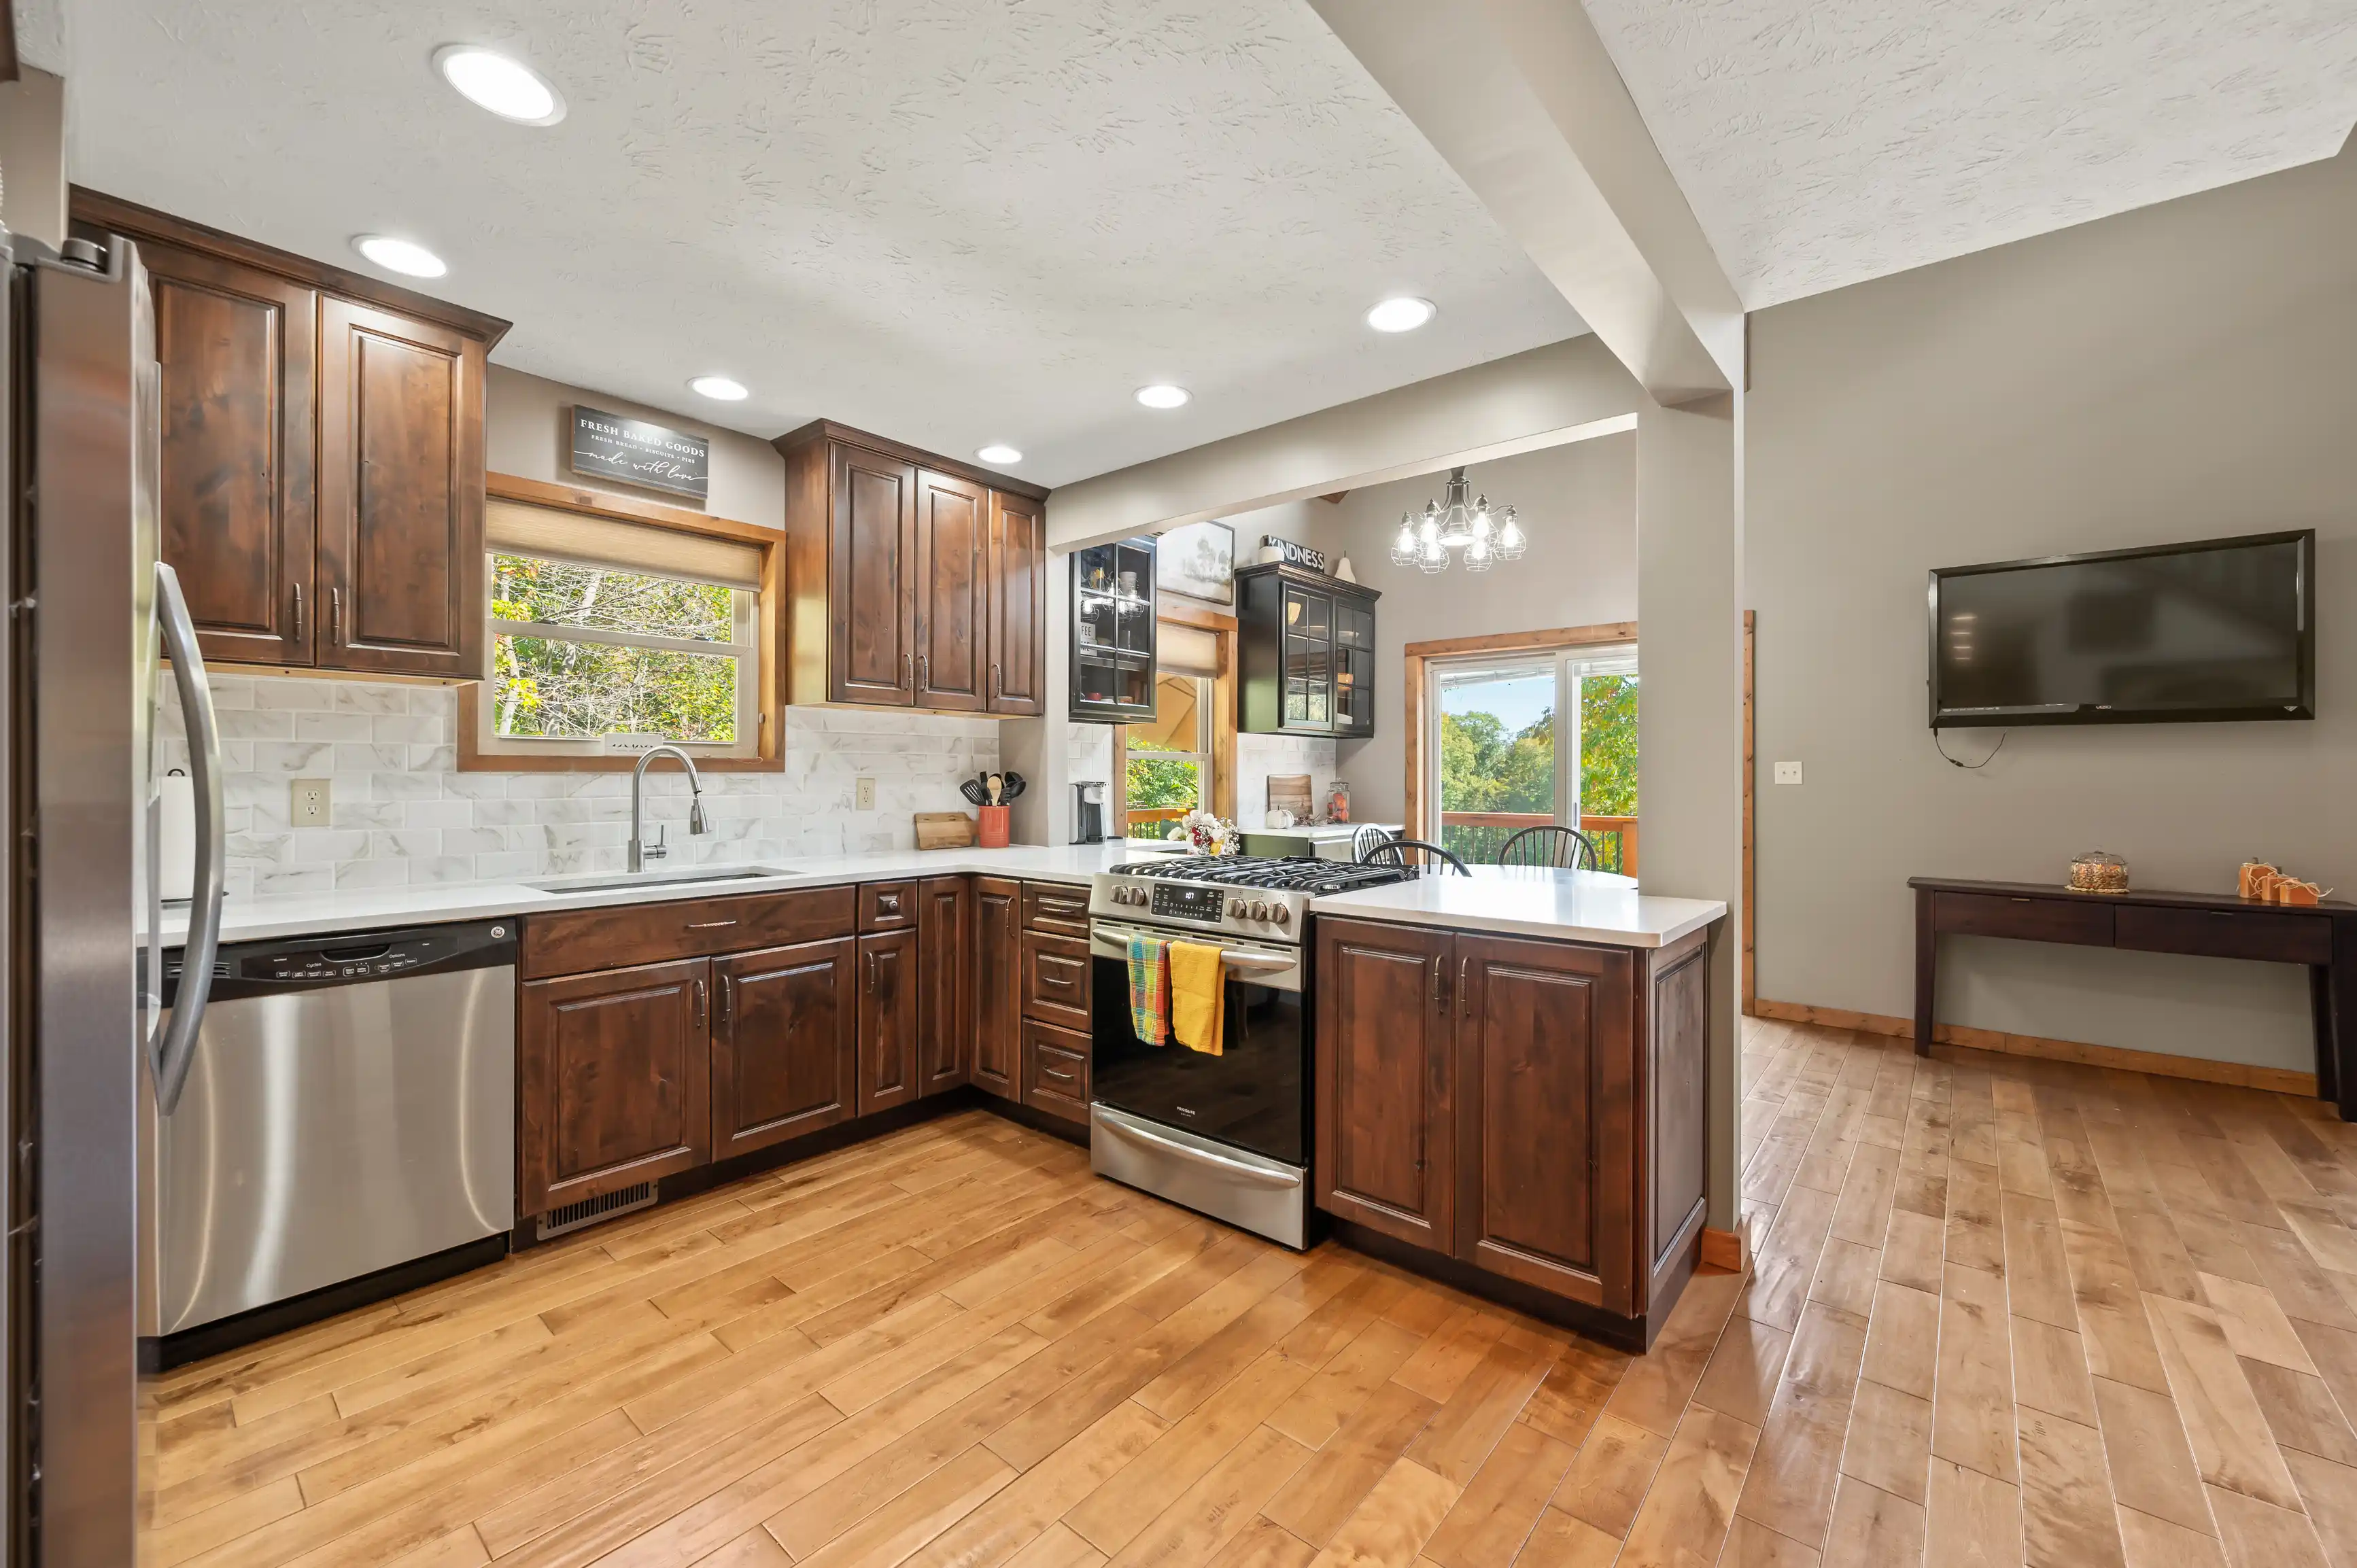 Modern kitchen interior with wooden cabinets, stainless steel appliances, and a hardwood floor.